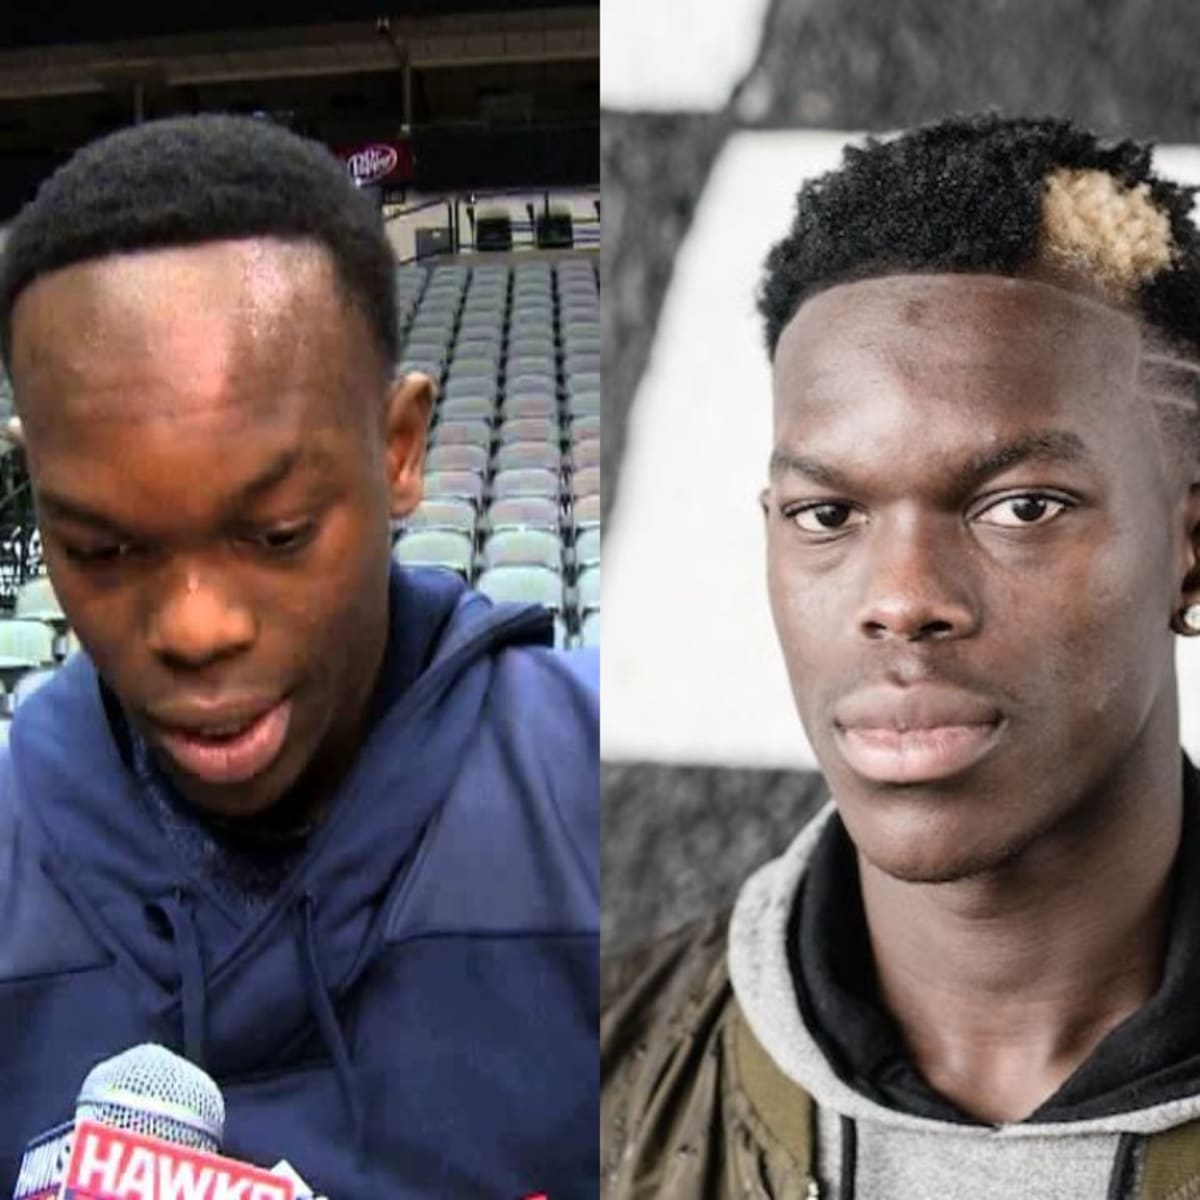 dennis-schroders-hairline-had-a-better-comeback-than-lebron-coming-back-from-3-1-down-says-nba-fan.jpg